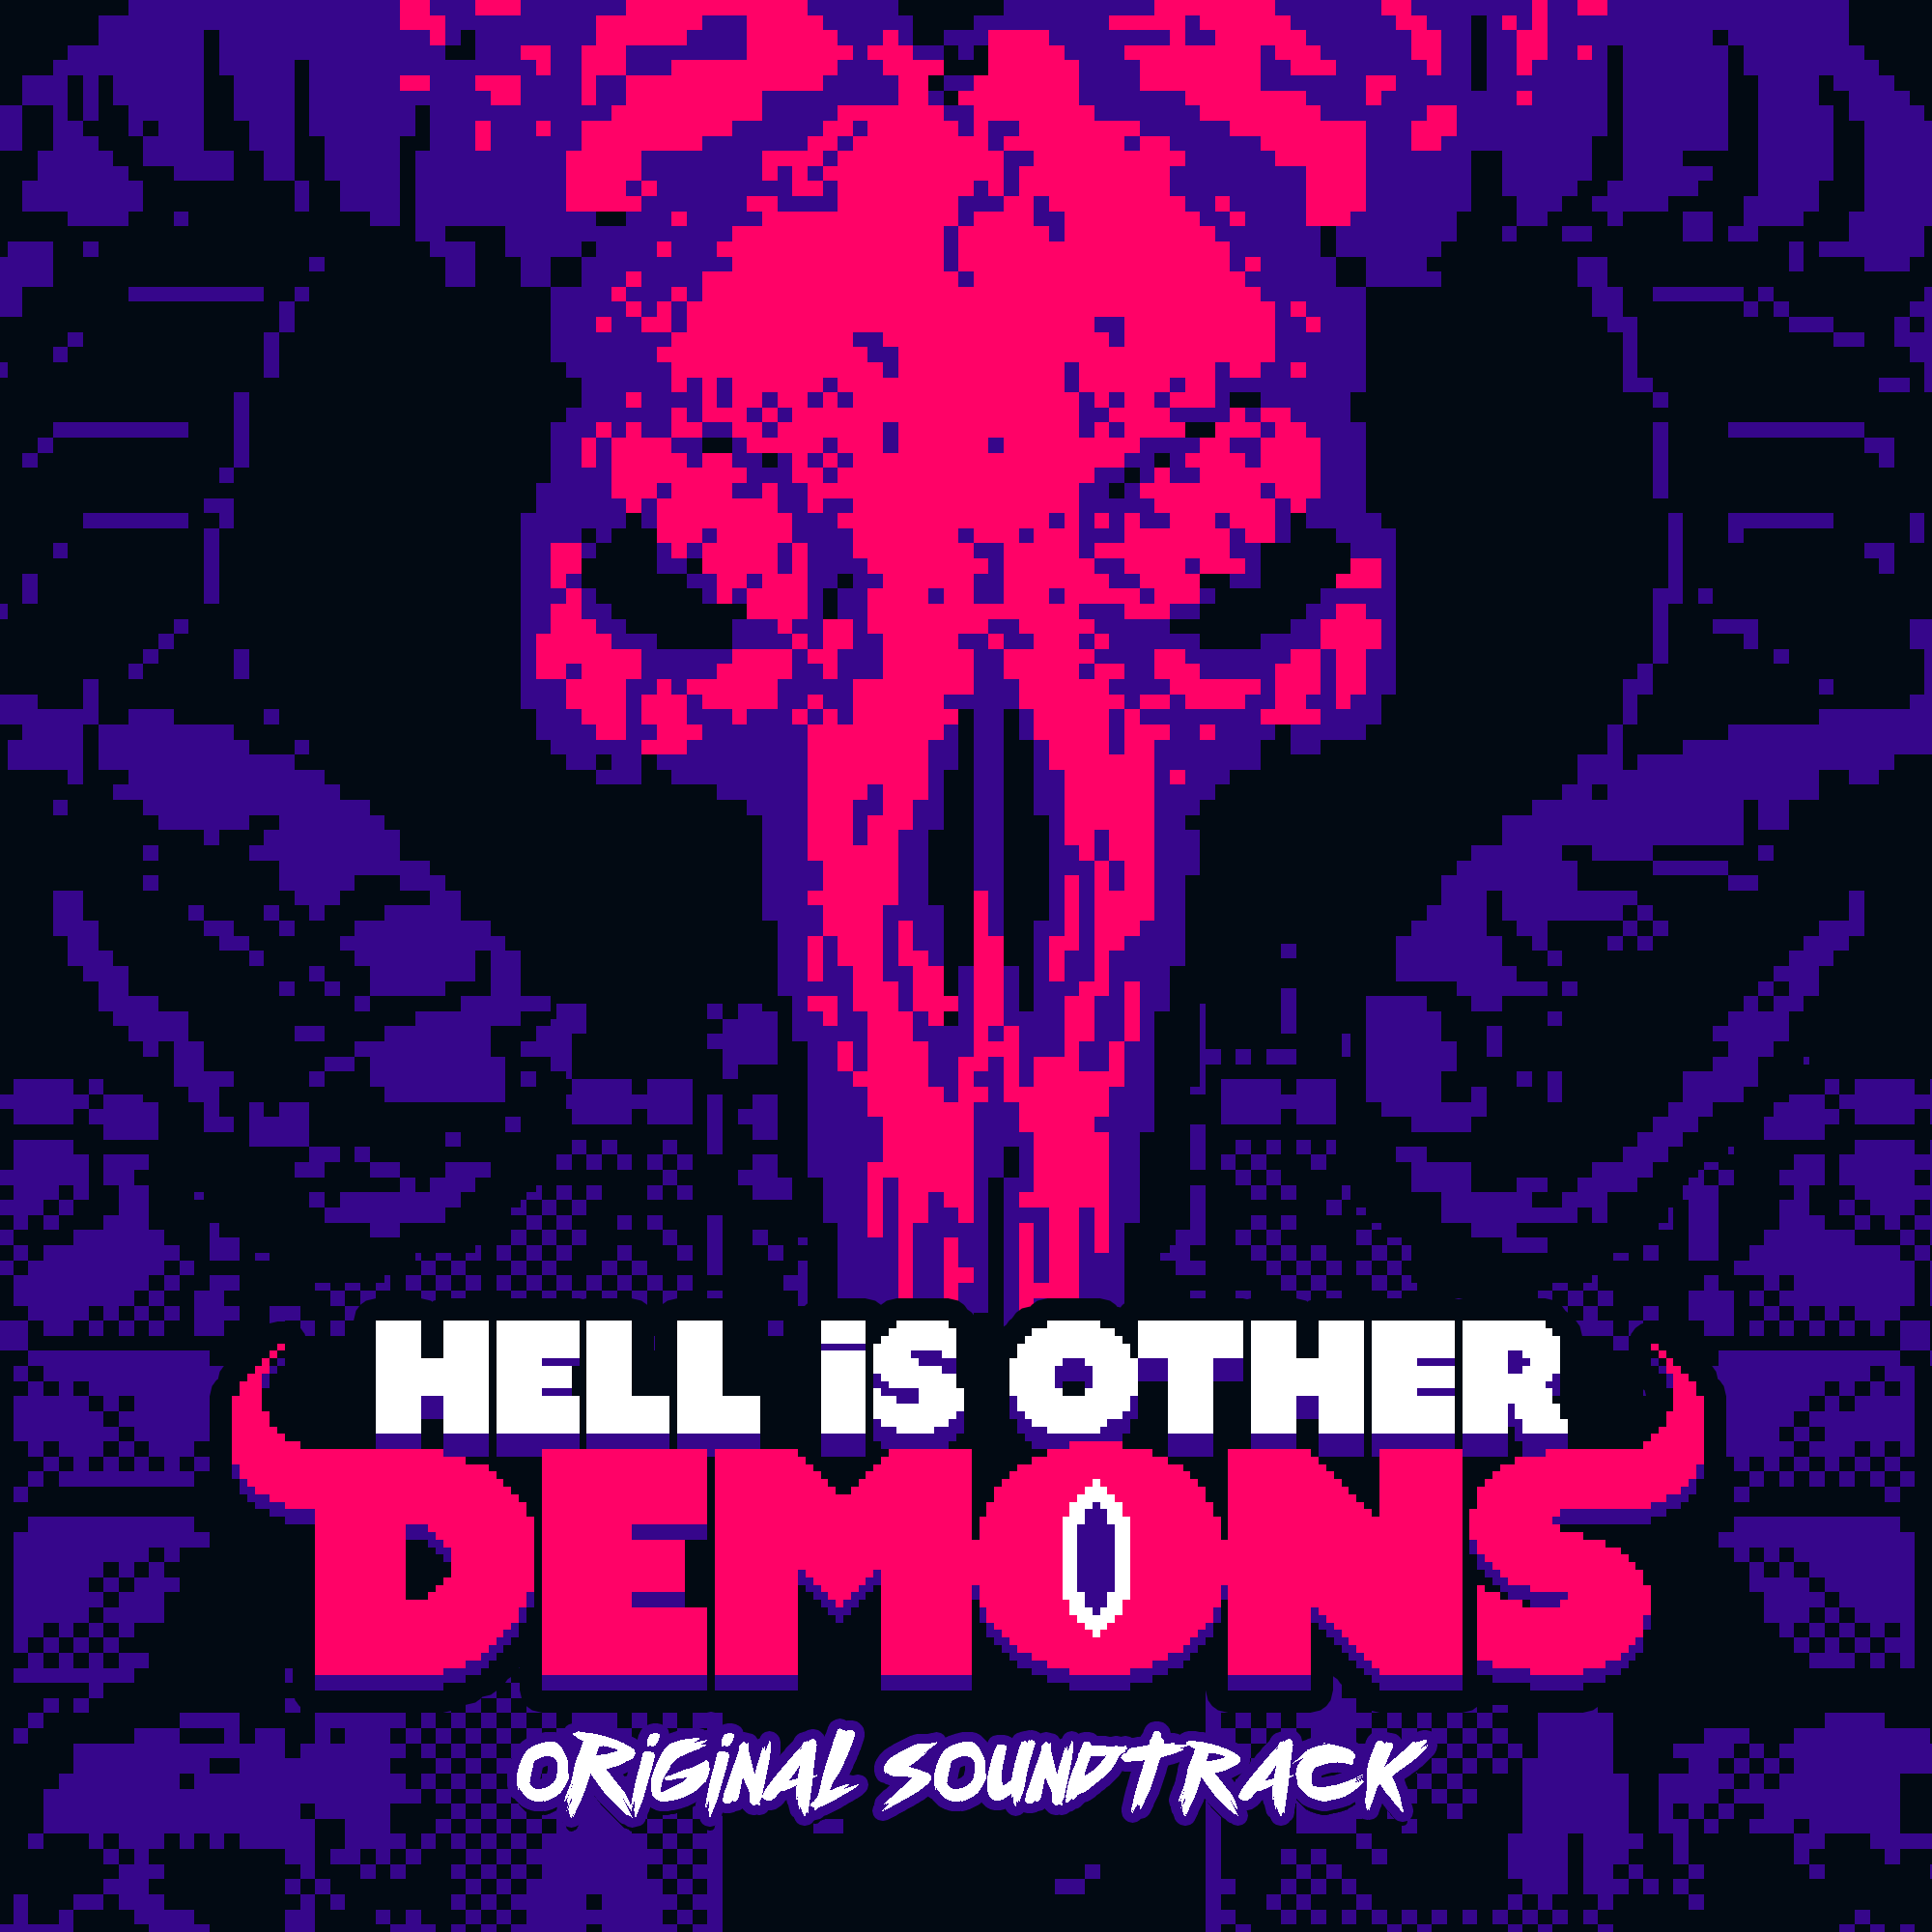 Hell is Others download the last version for ipod